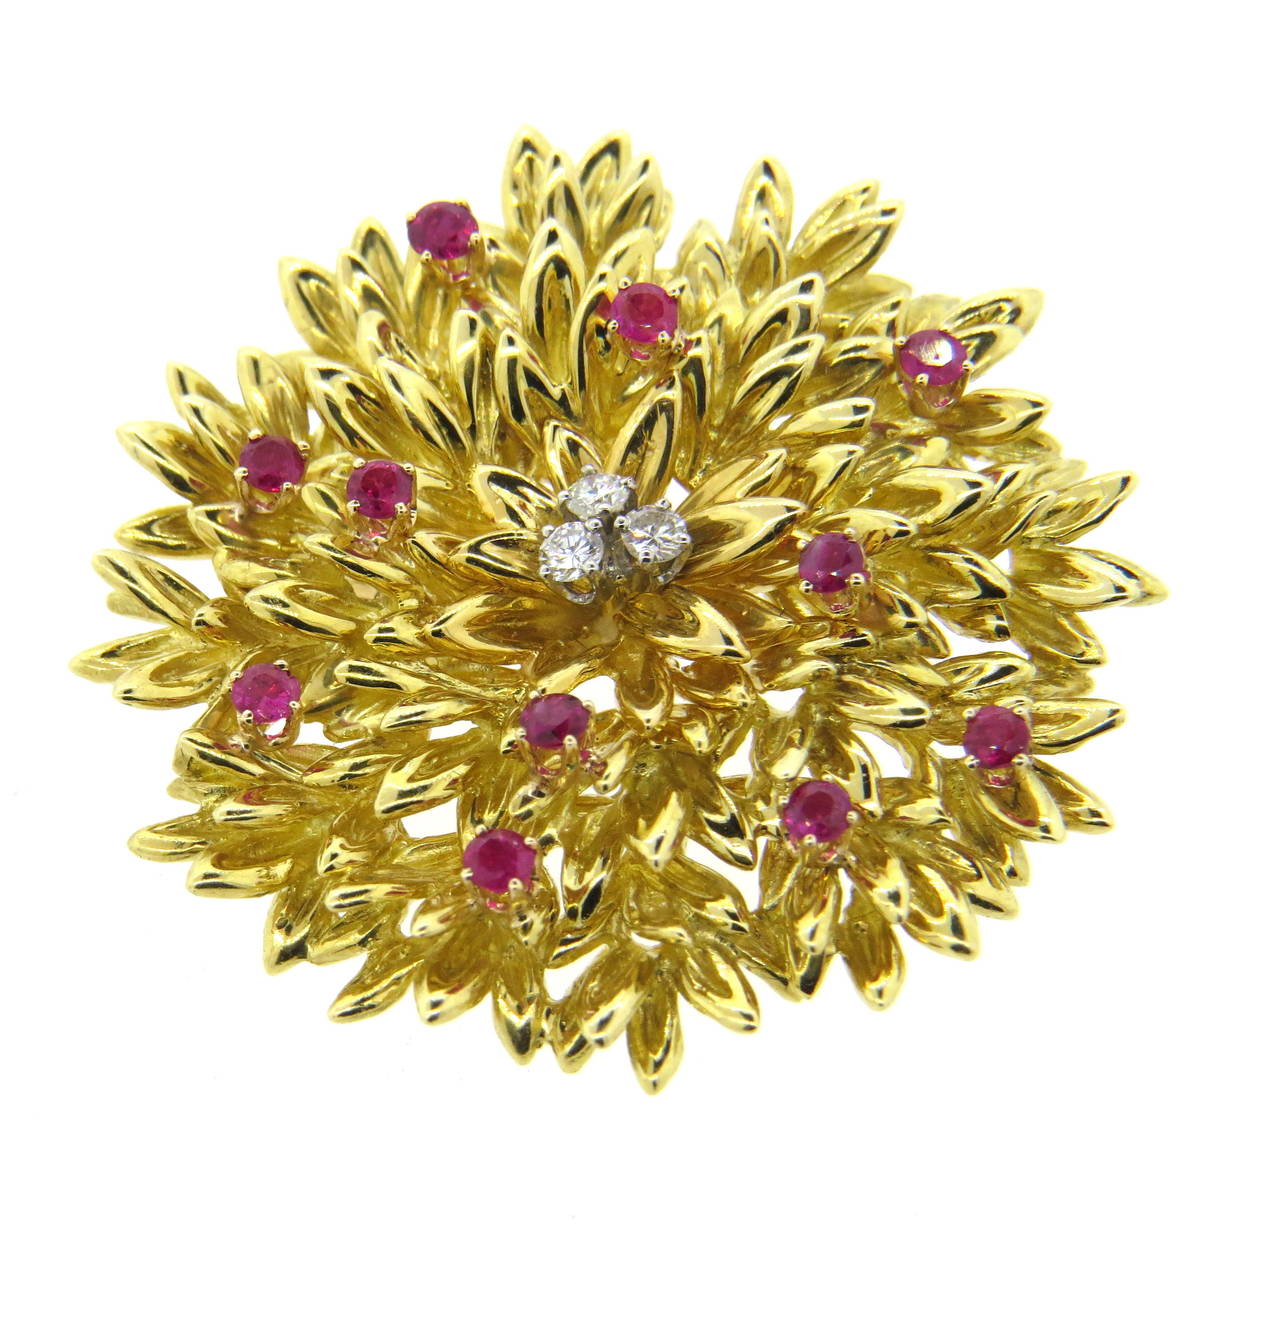 An 18k yellow gold pin set with rubies and approximately 0.15ctw of G/VS diamonds.  Crafted by Tiffany & Co., the pin measures 41mm in diameter and weighs 25 grams.